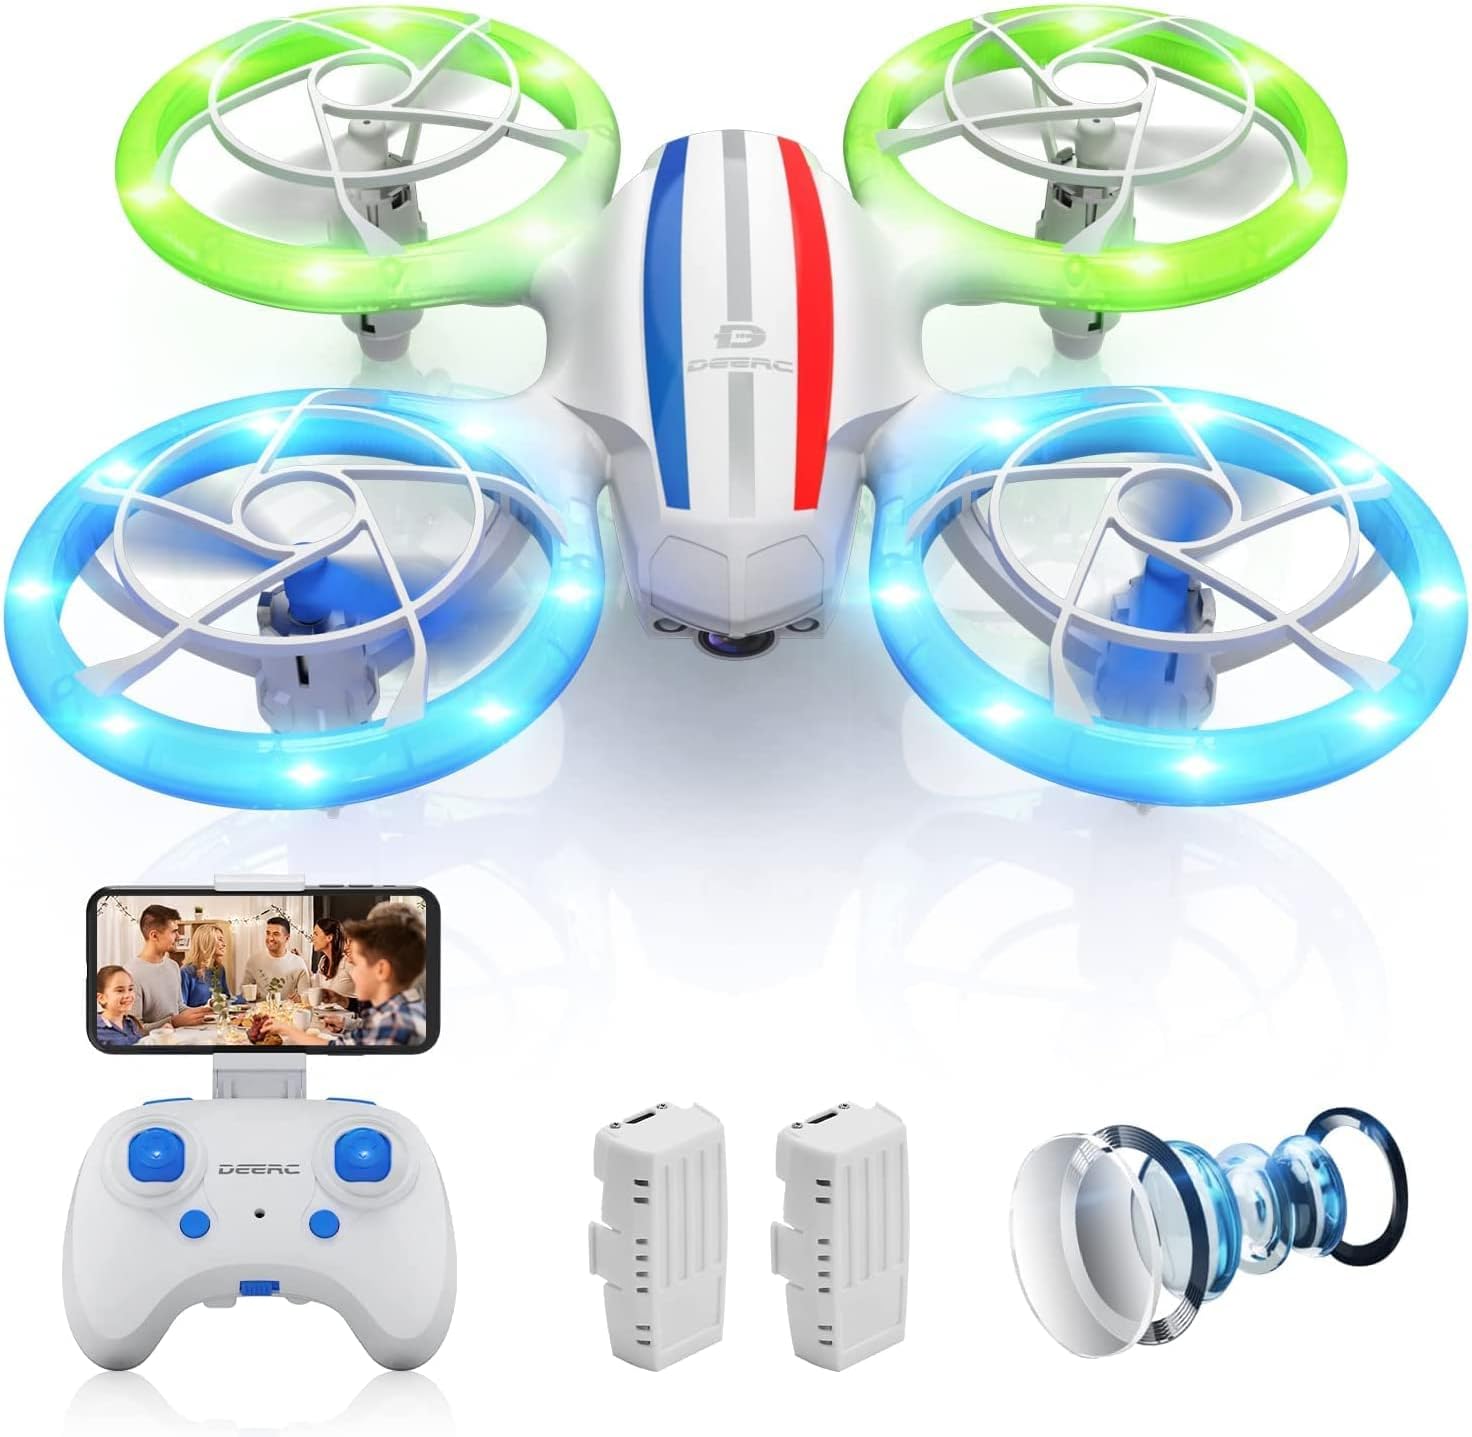 DEERC Mini Drone with Camera for Children, RC FPV Quadcopter with Wifi Transmission, 2 Batteries Long Flight Time, Colourful LED Lights, App…